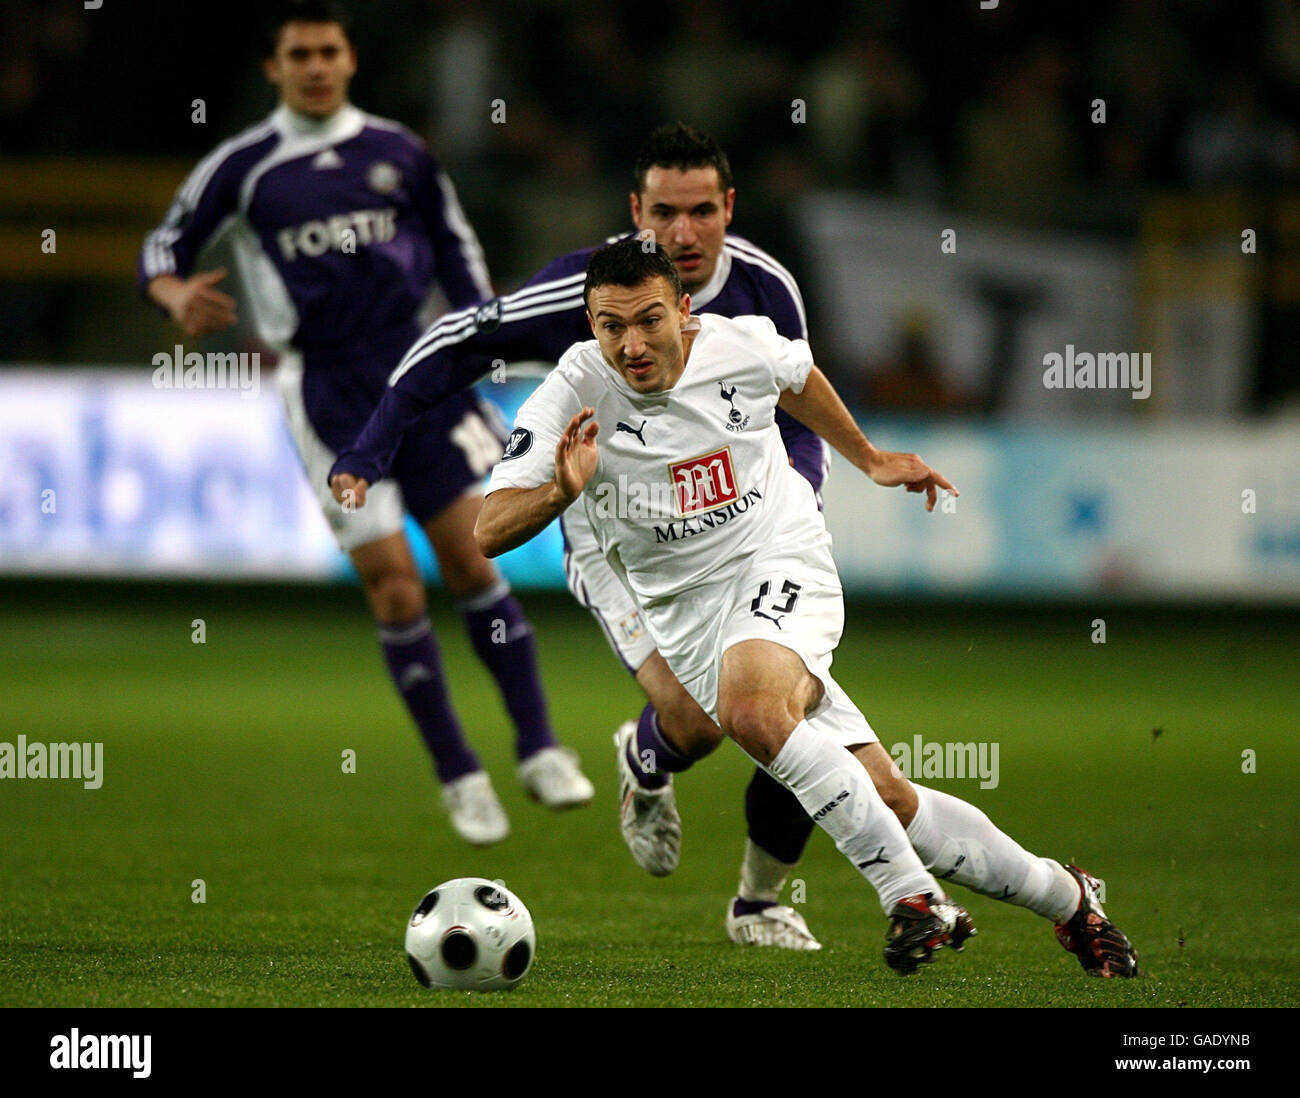 Tottenham Hotspur's Steed Malbranque in action during the UEFA Group G match at the Constant Vanden Stock Stadium, Brussels. Stock Photo